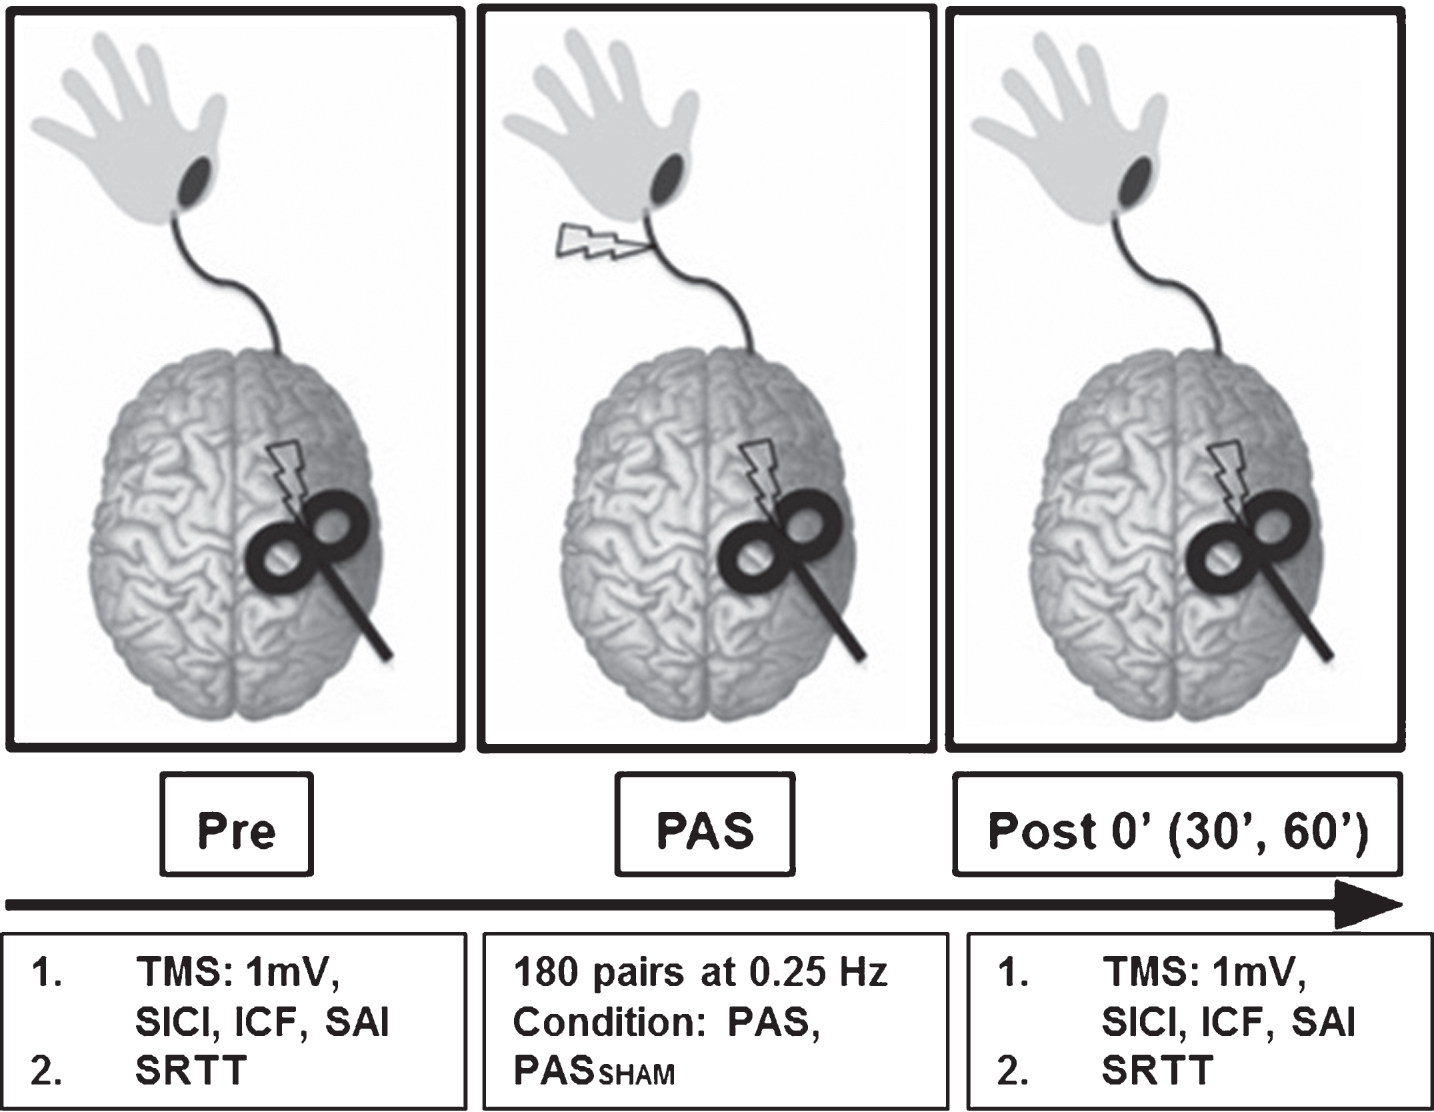 Experimental paradigm. During the PAS protocol 180 pulse pairs using an interstimulus interval of N20+5 ms at 0.25 Hz were delivered over the median nerve and primary motor cortex. Measures of corticomotor excitability (1 mV, SICI, ICF, SAI) and motor skill performance (SRTT) were assessed at baseline, immediately following PAS (POST 0) and at 30 and 60 minutes following PAS (POST30 an POST60). (SICI: short interval cortical inhibition, ICF: intracortical facilitation, SAI: short afferent inhibition, SRTT: serial reaction time task).